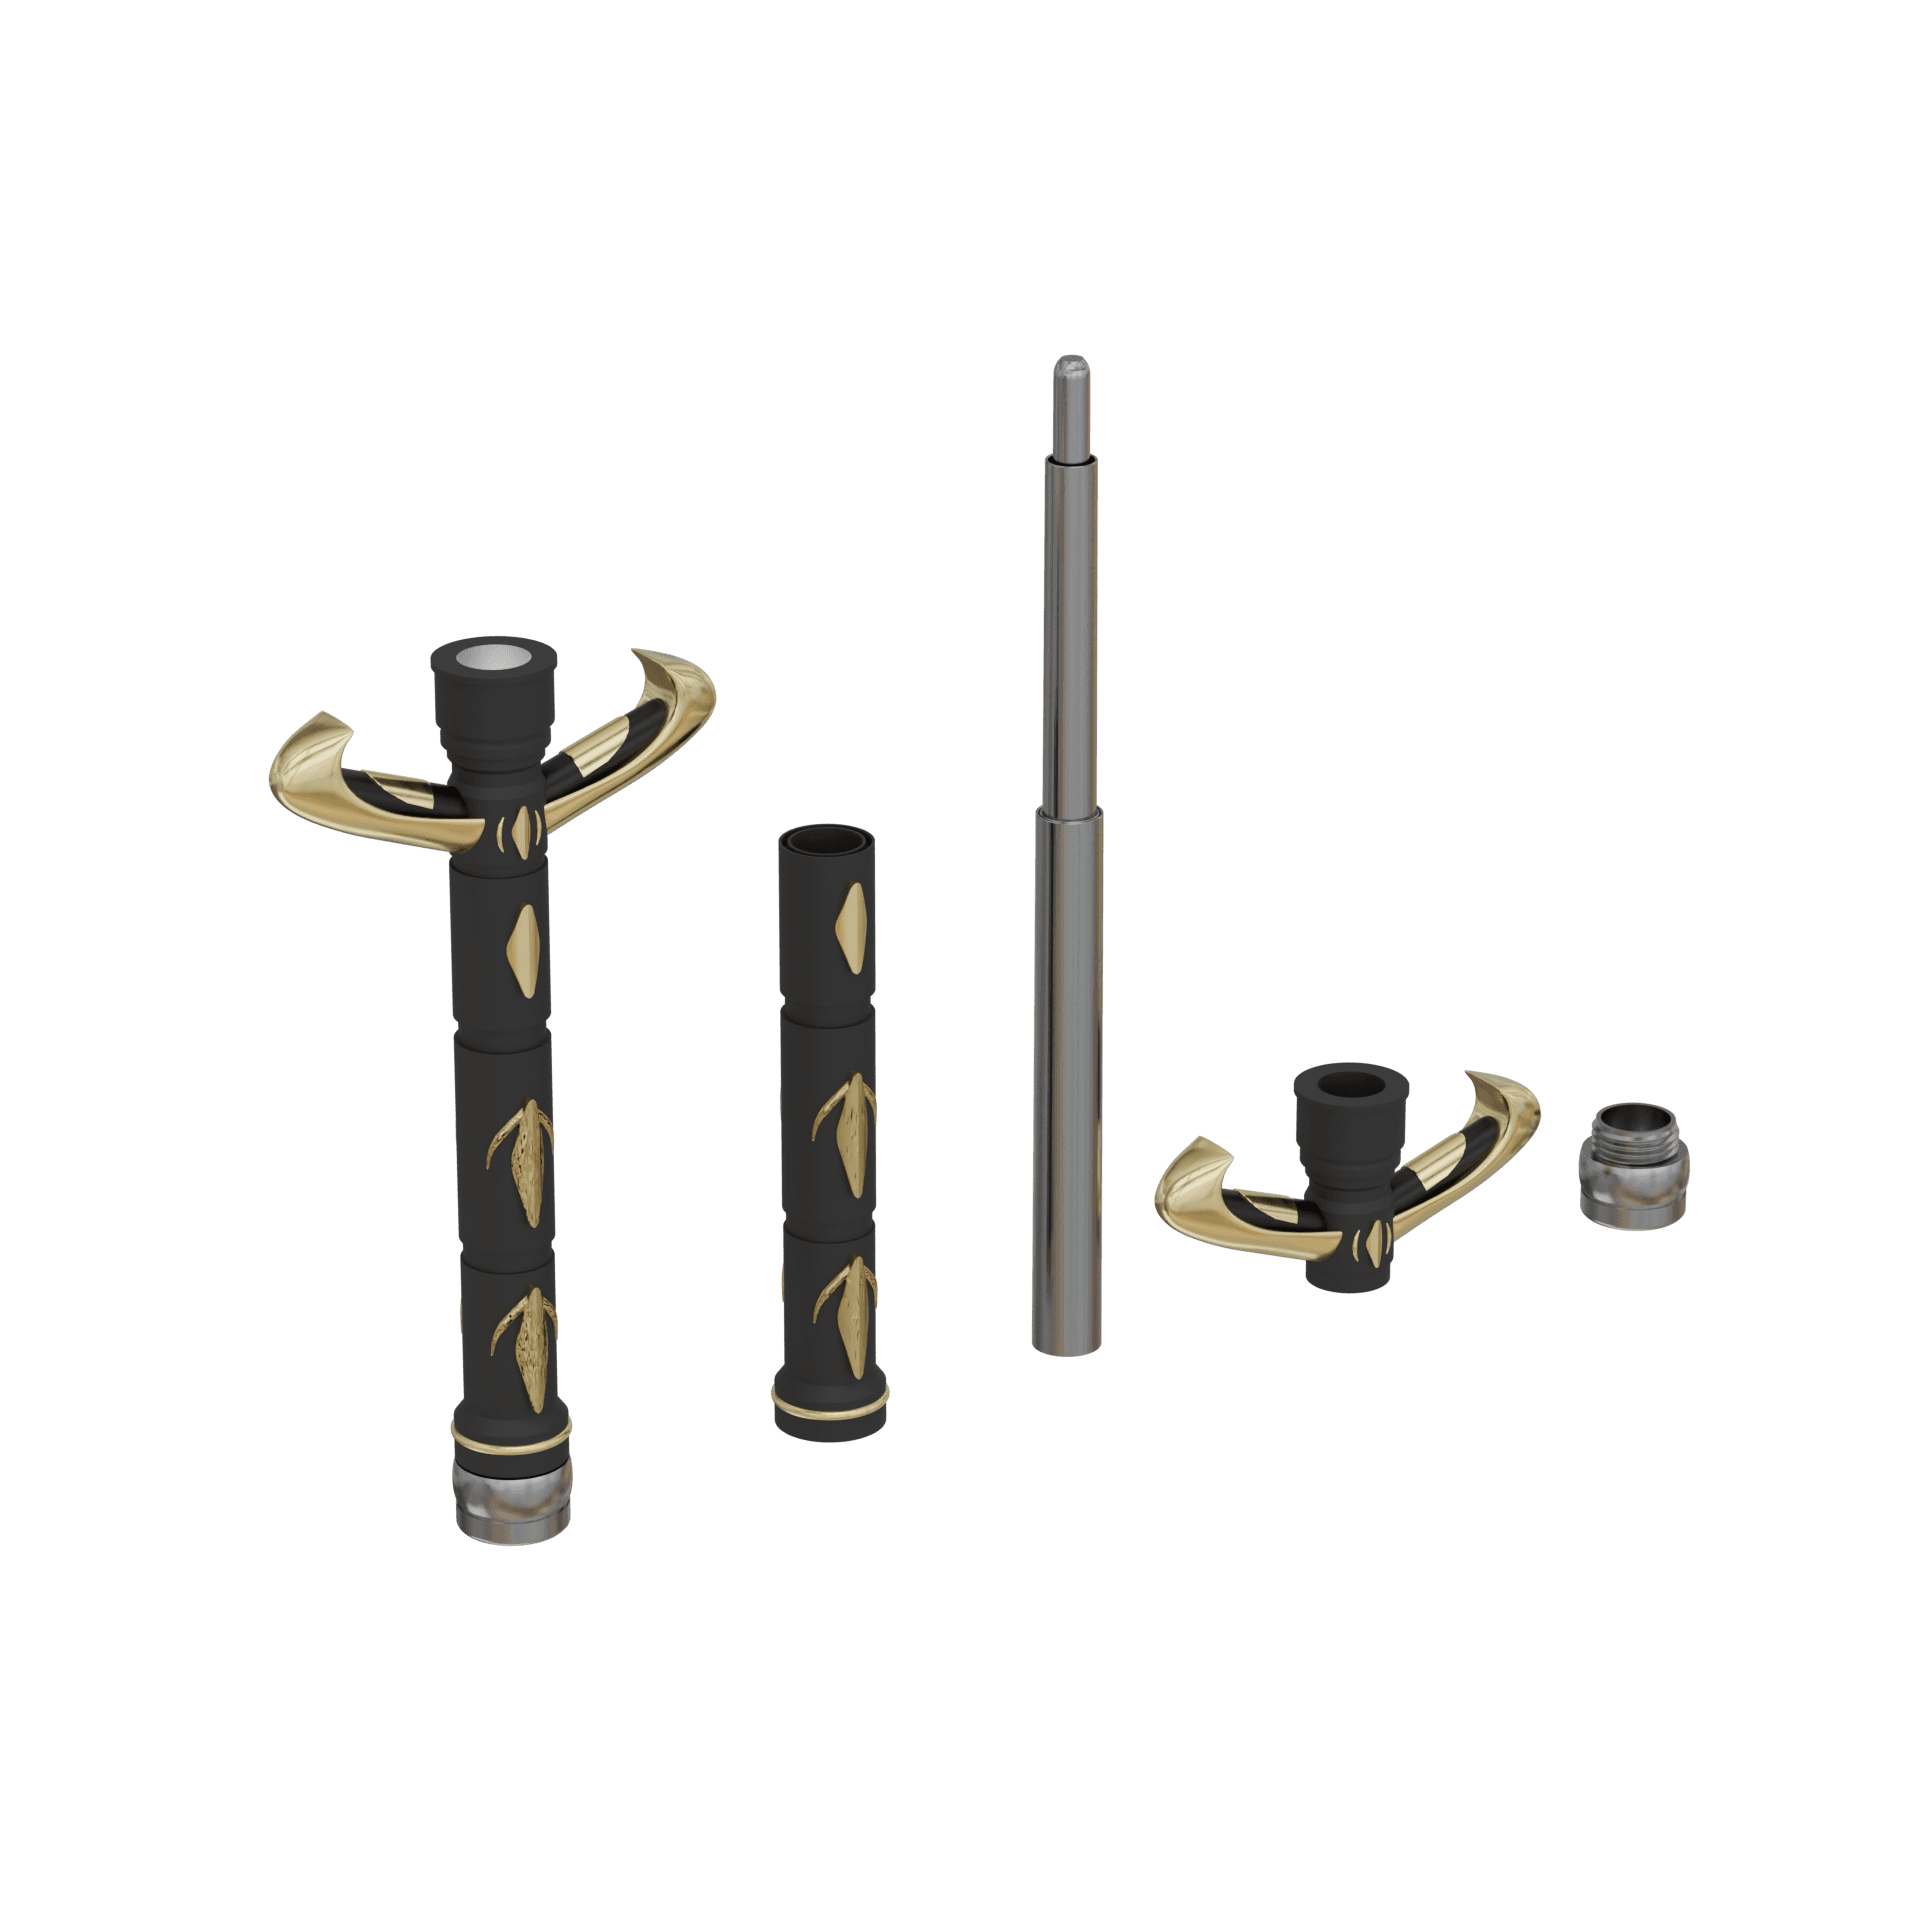 Print in Place Collapsing Jedi Lightsaber Concept 12 3d model